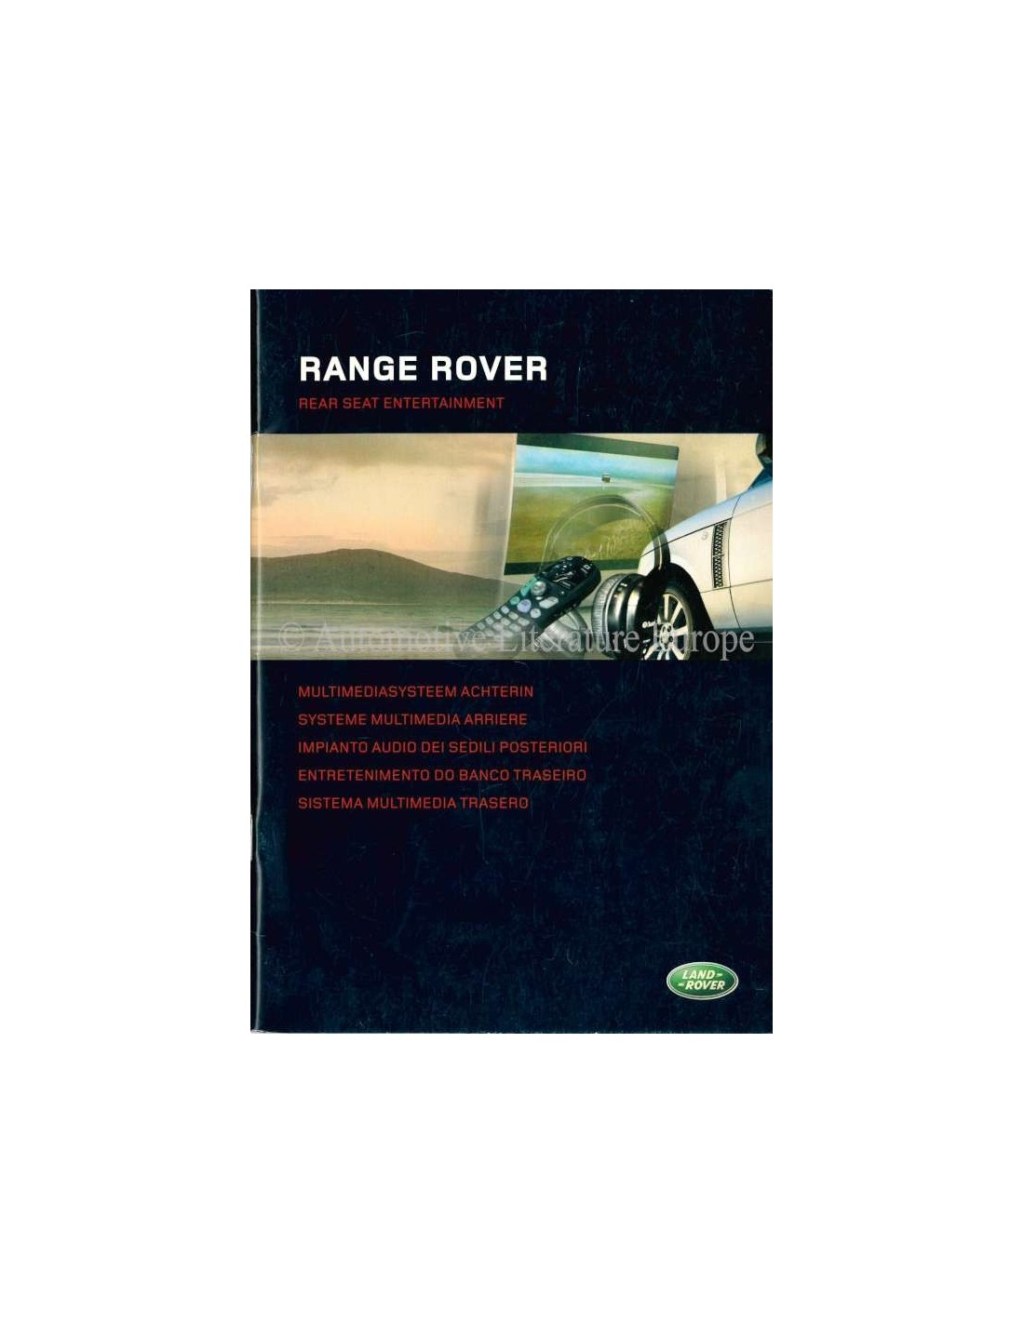 Picture of: RANGE ROVER REAR SEAT ENTERTAINMENT OWNERS MANUAL DUTCH